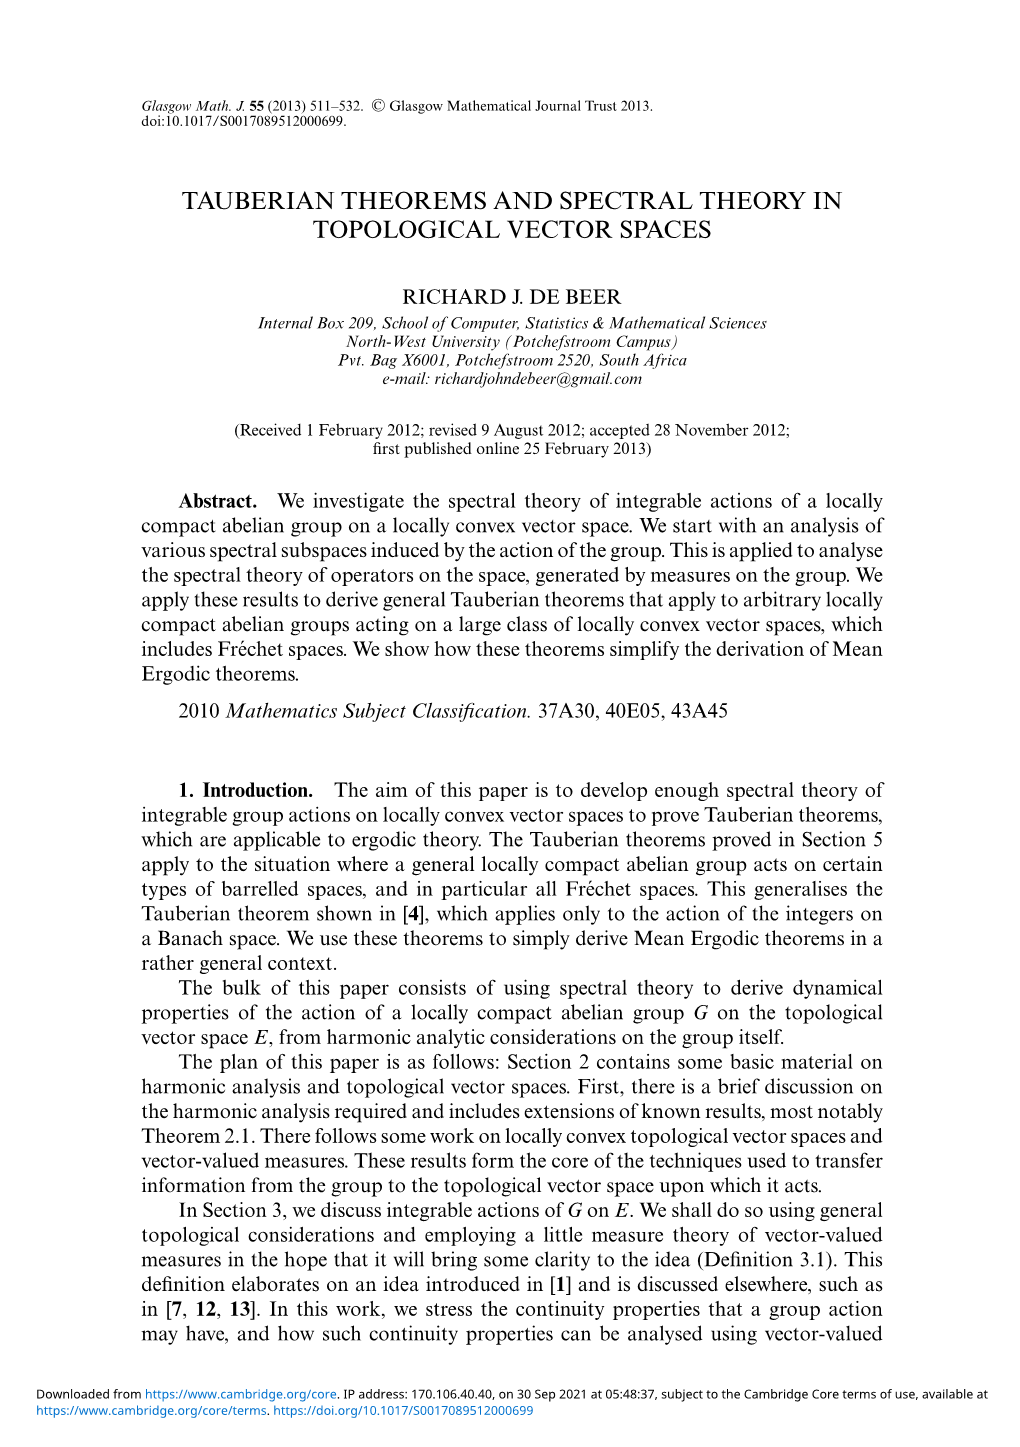 Tauberian Theorems and Spectral Theory in Topological Vector Spaces